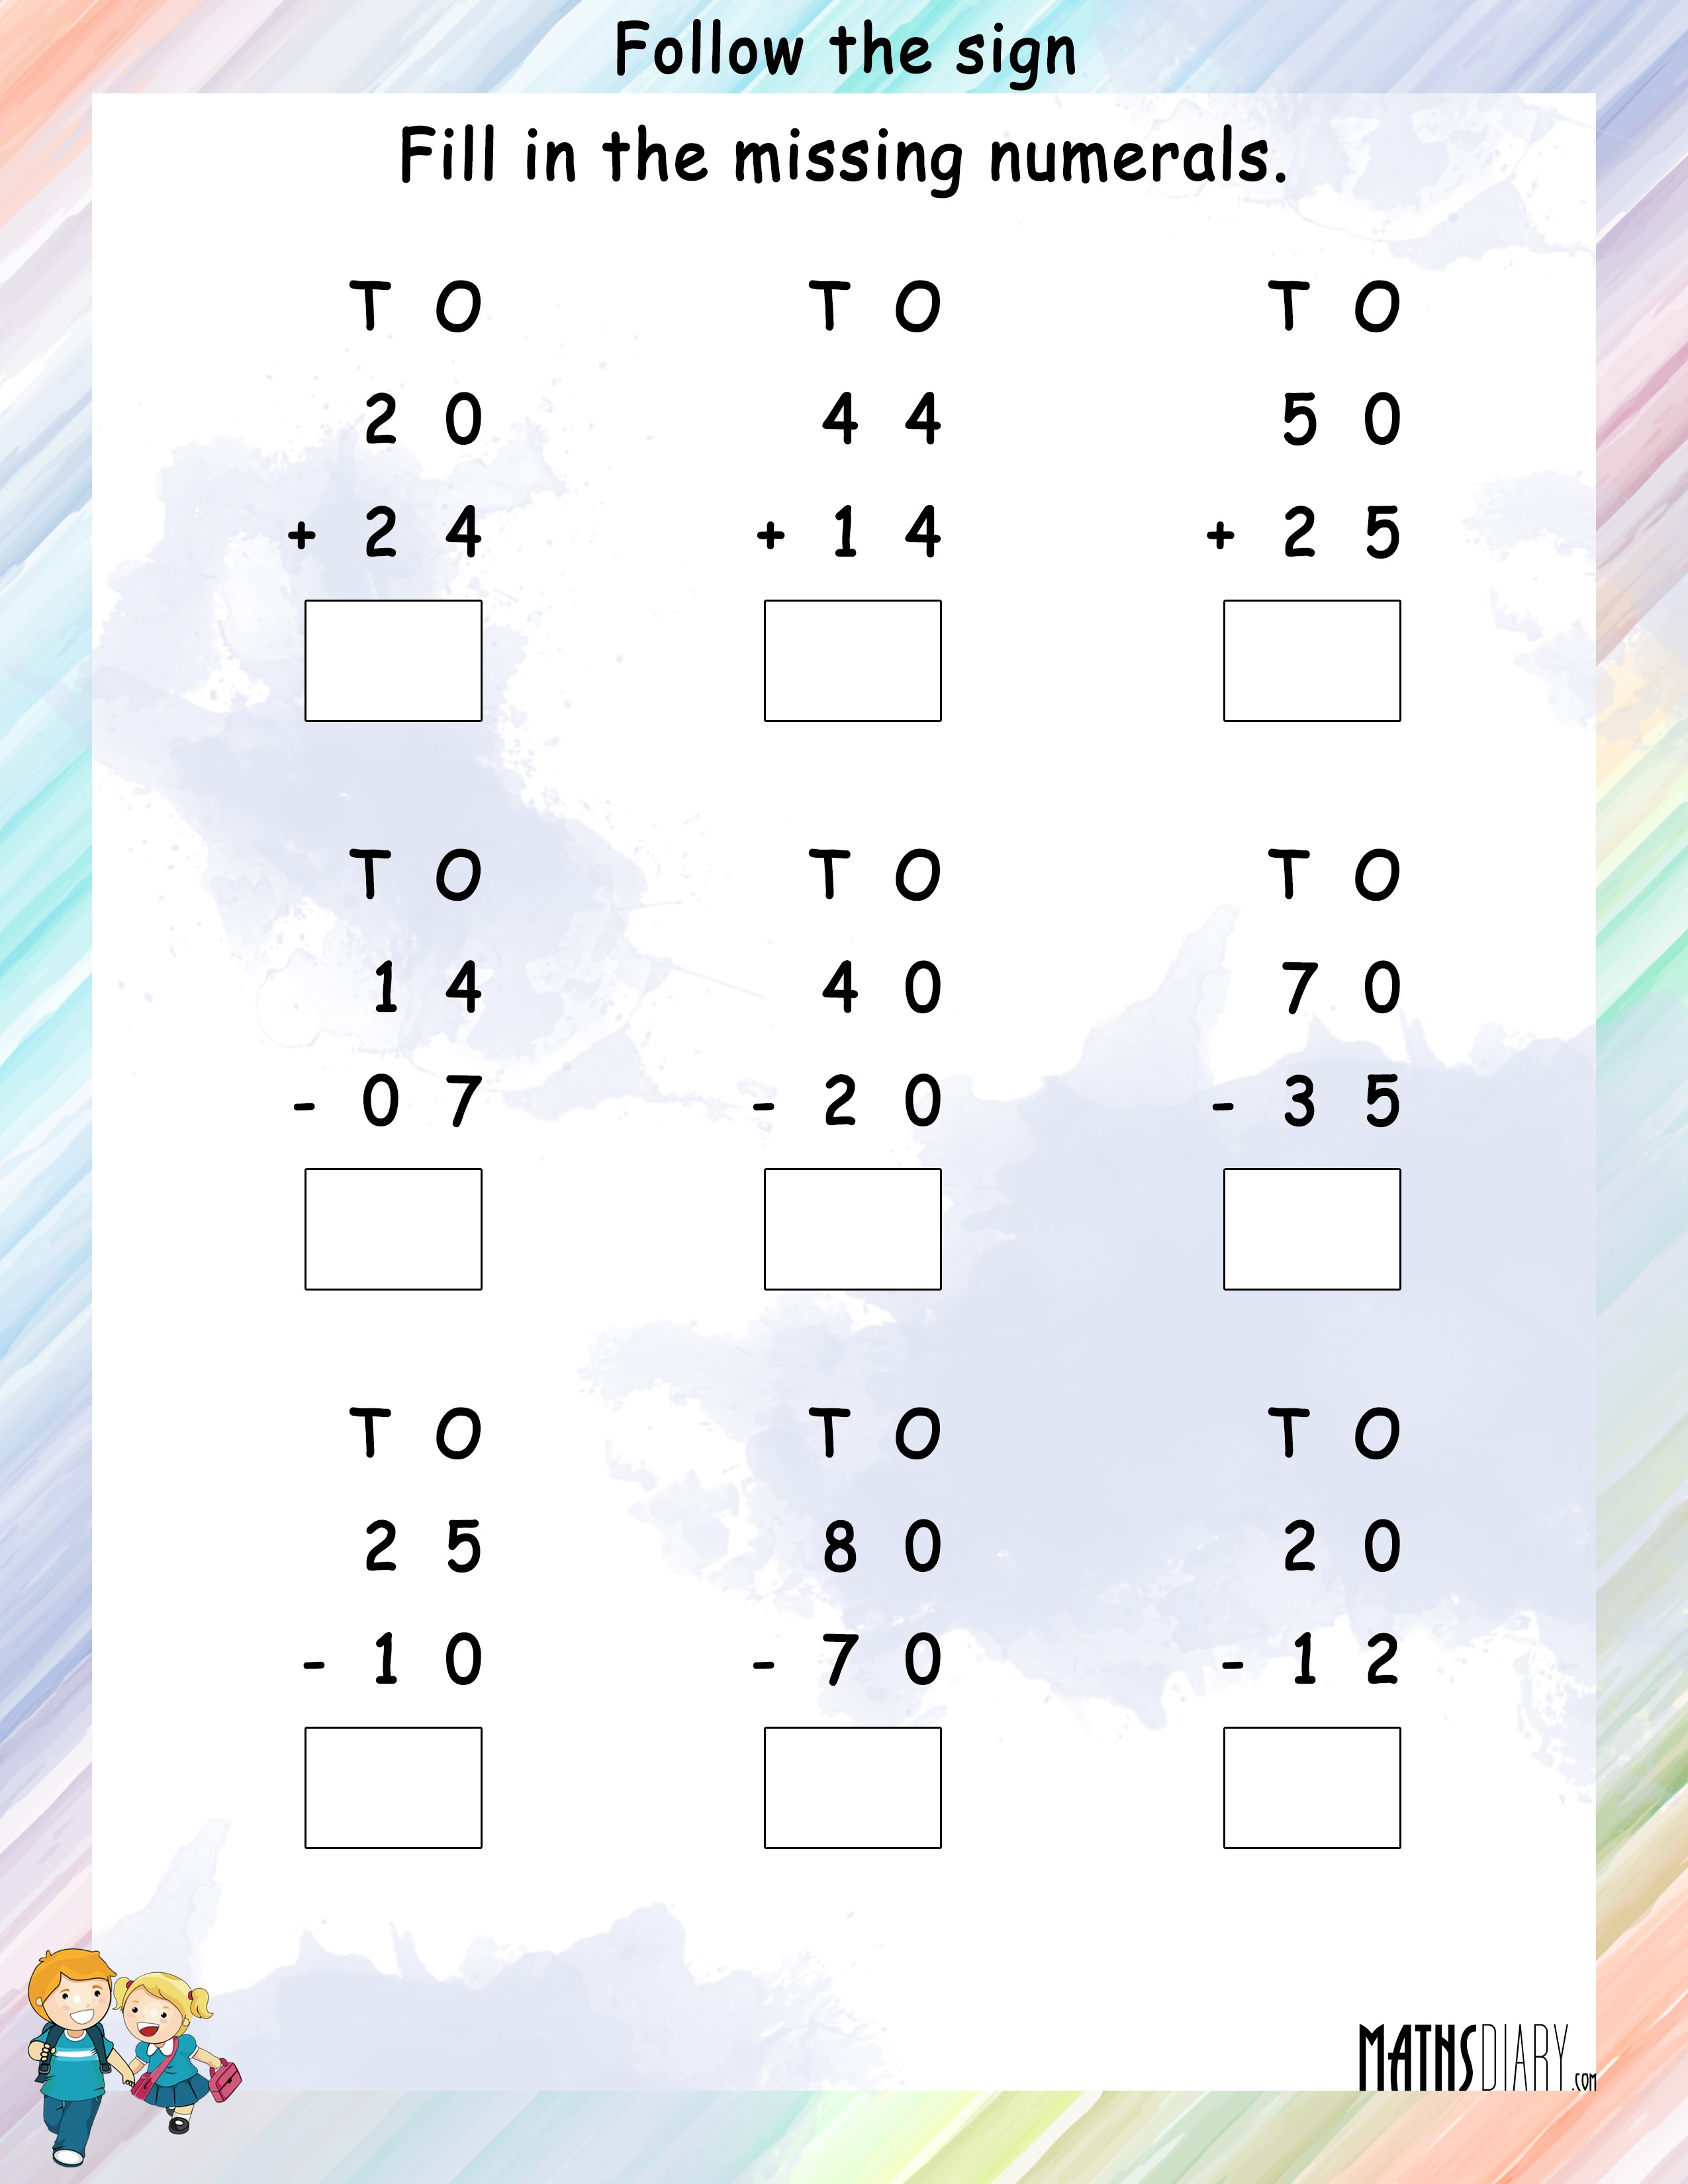 addition-subtraction-multiplication-and-division-worksheets-for-grade-3-times-tables-worksheets